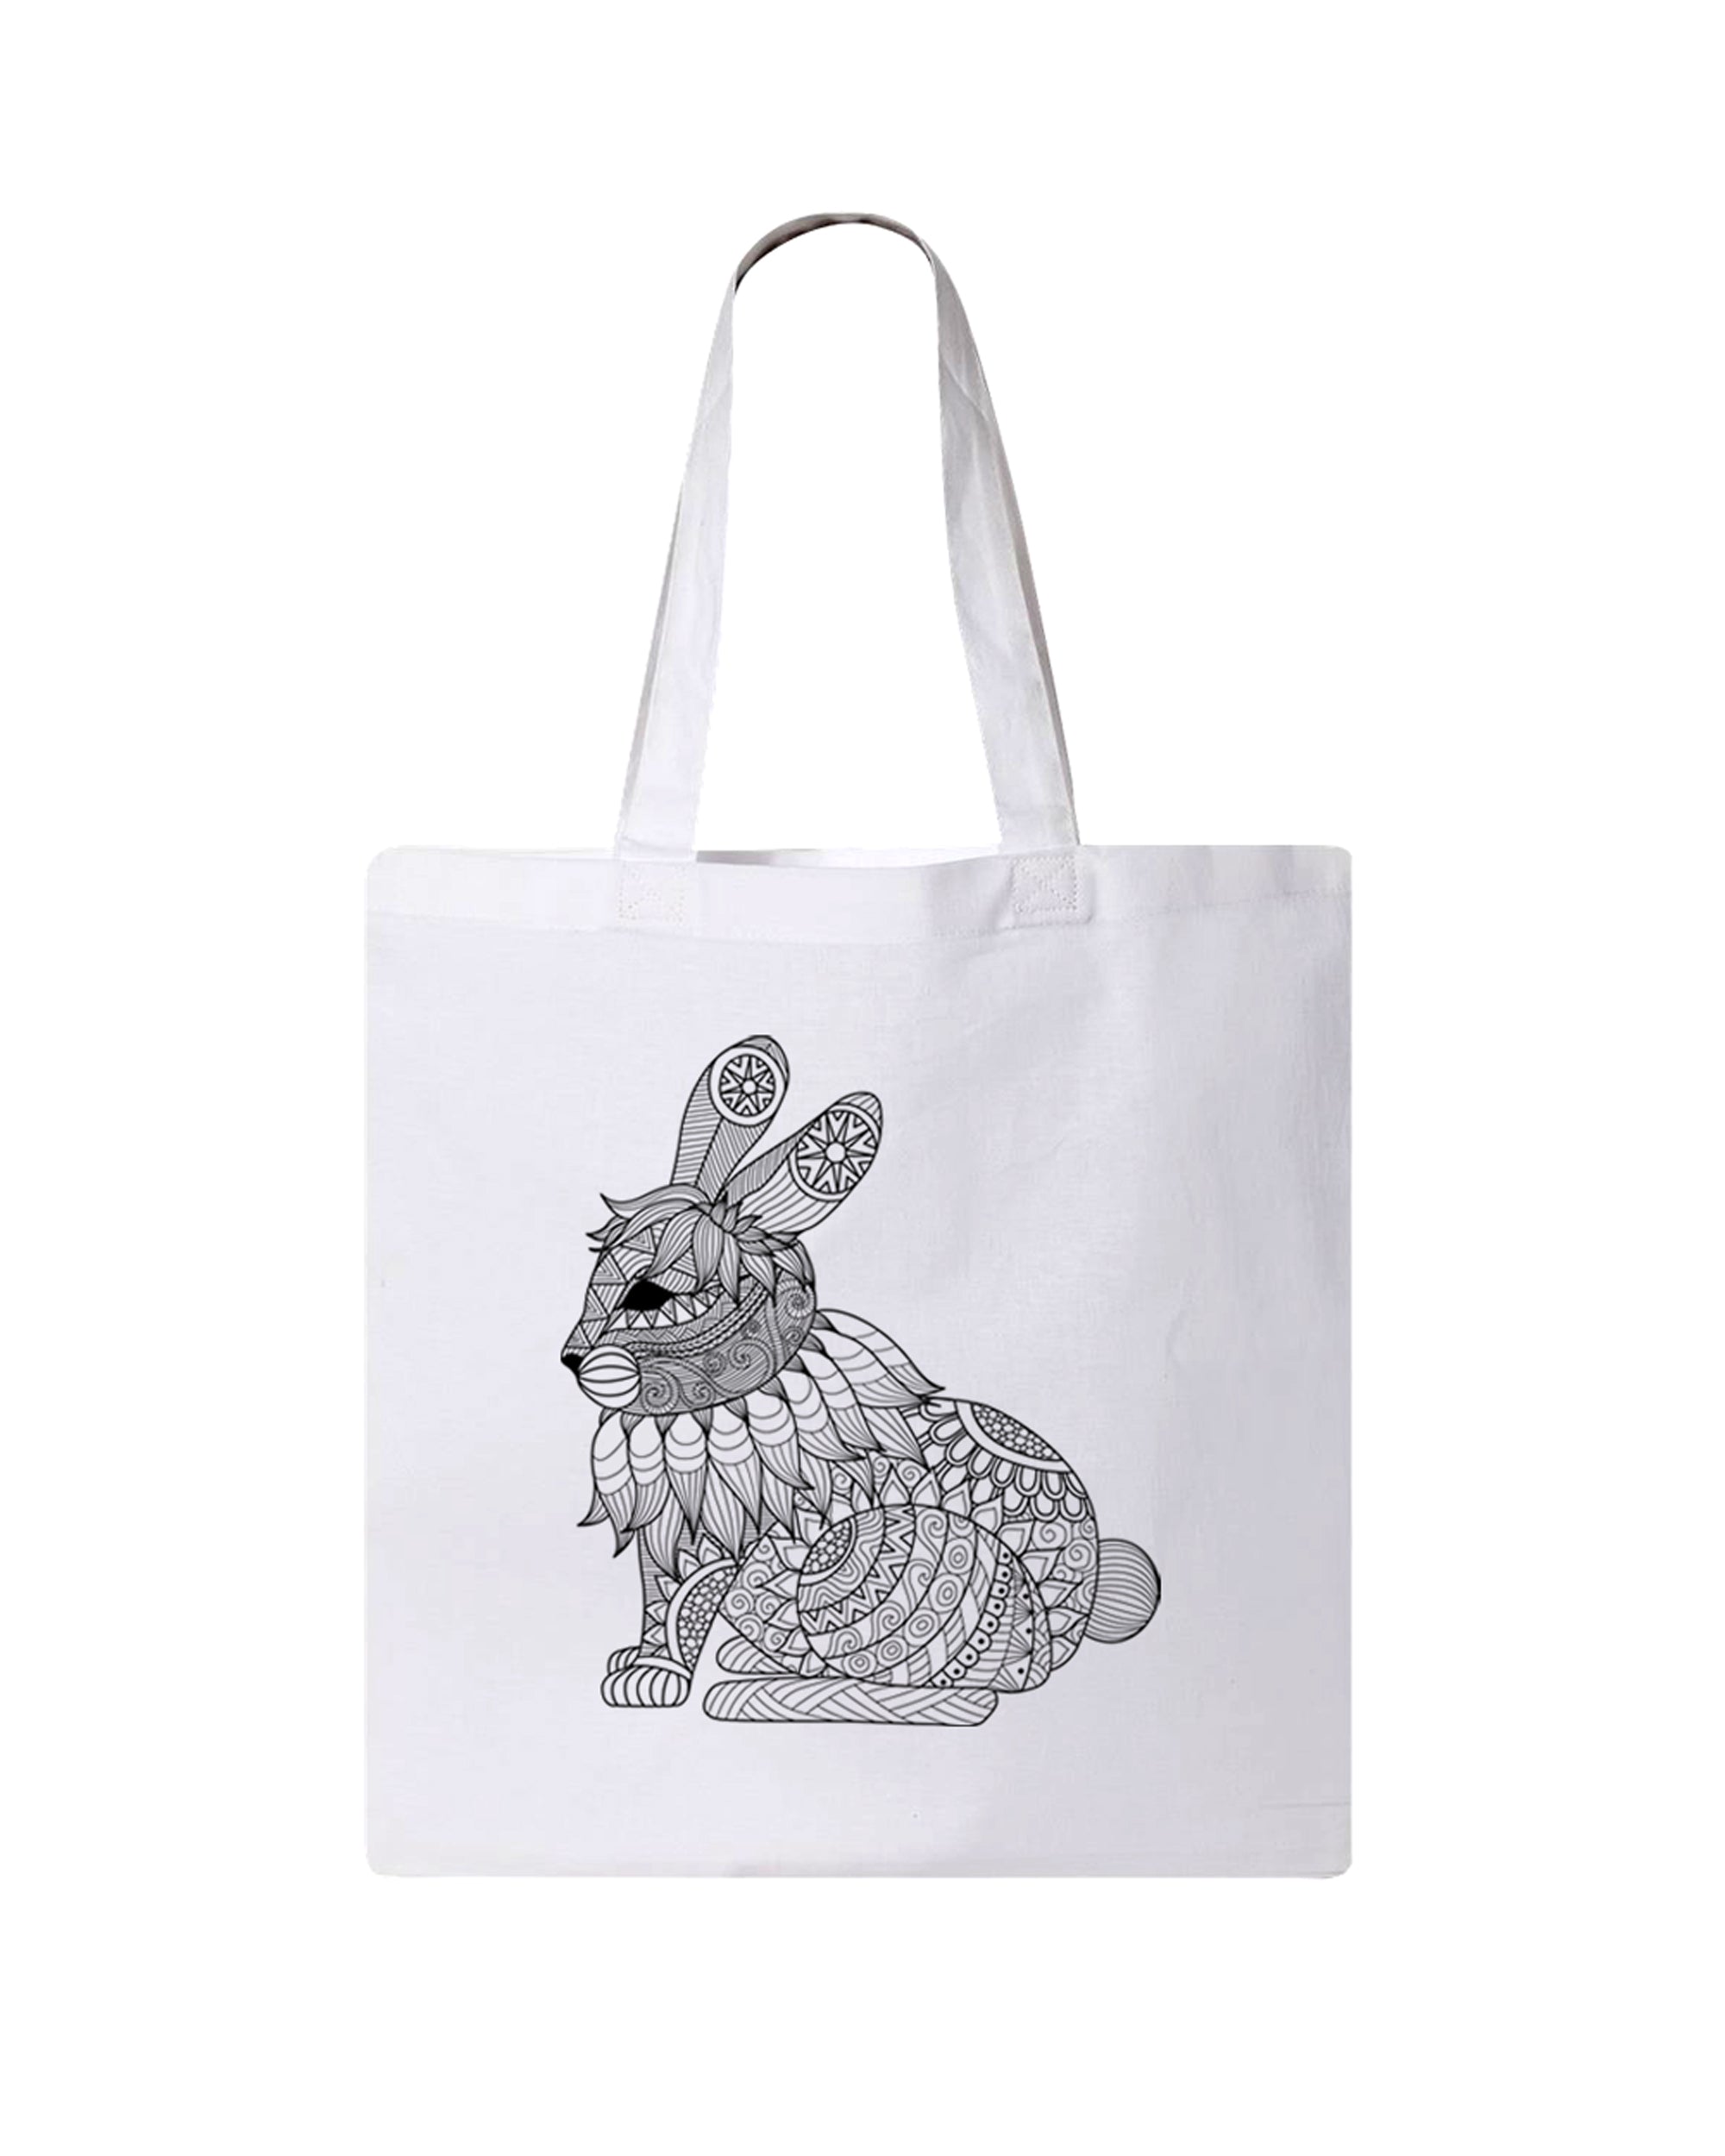 Bunny Coloring White Canvas Tote Bag - Adorned By You